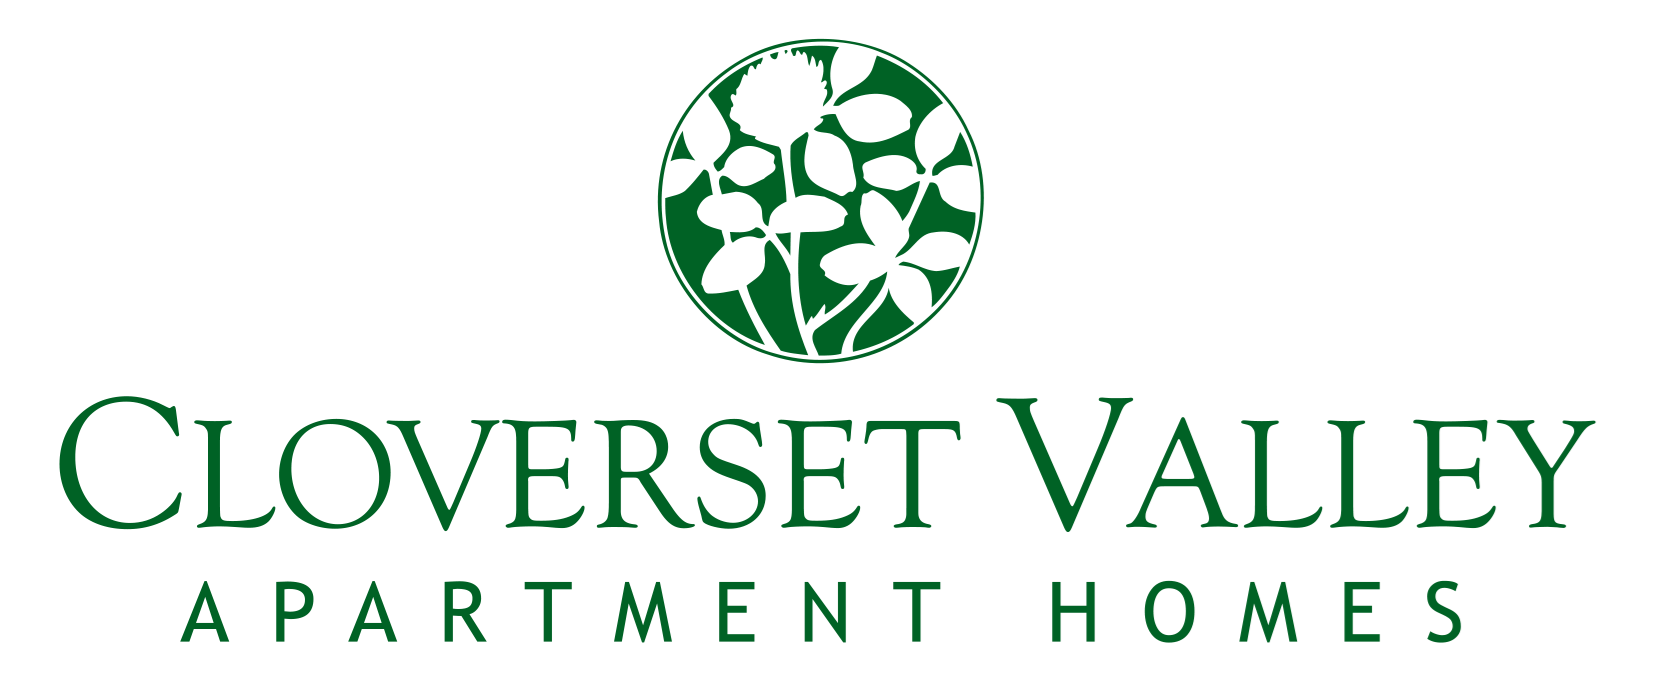 the logo for clover valley apartment homes